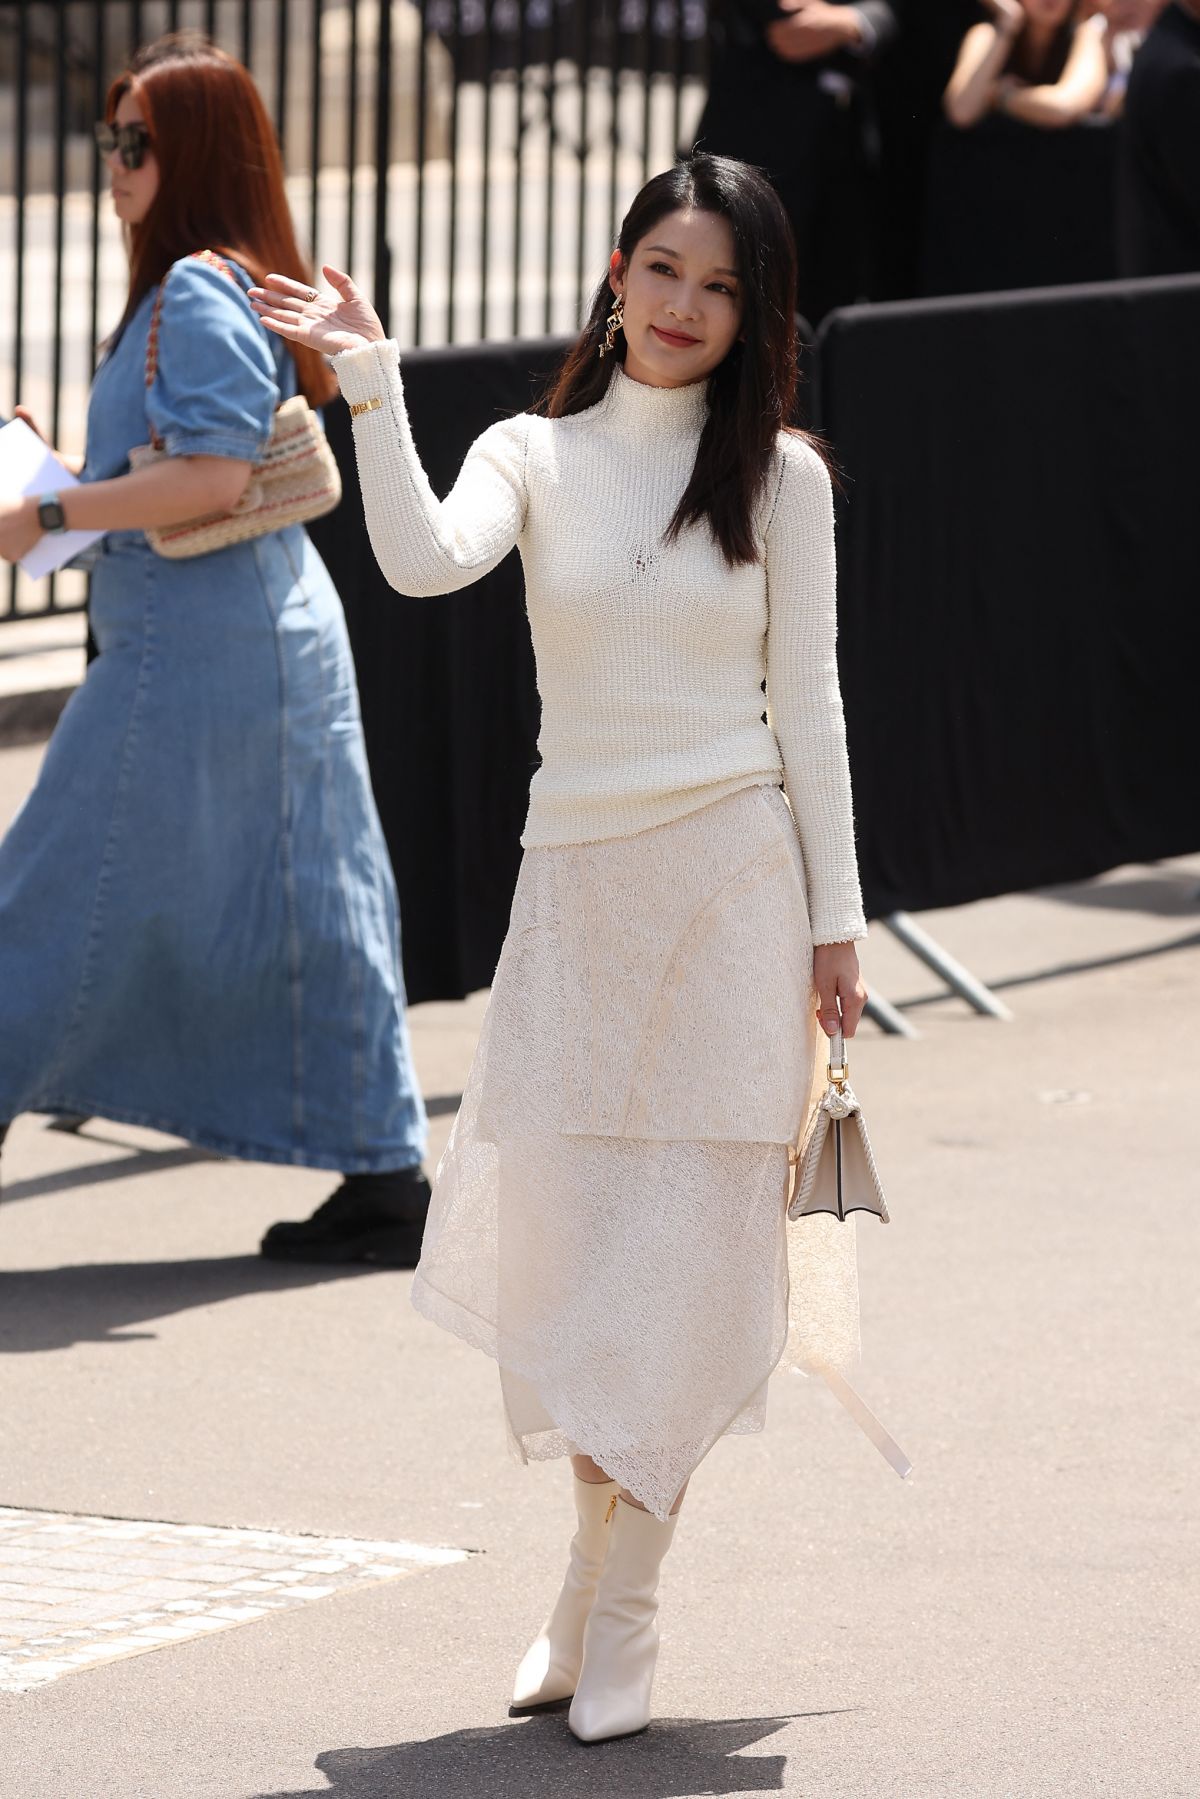 Li Qin Shines in High Neck White Dress and Long Boots at Fendi Haute Couture Spring/Summer 23/24 Show